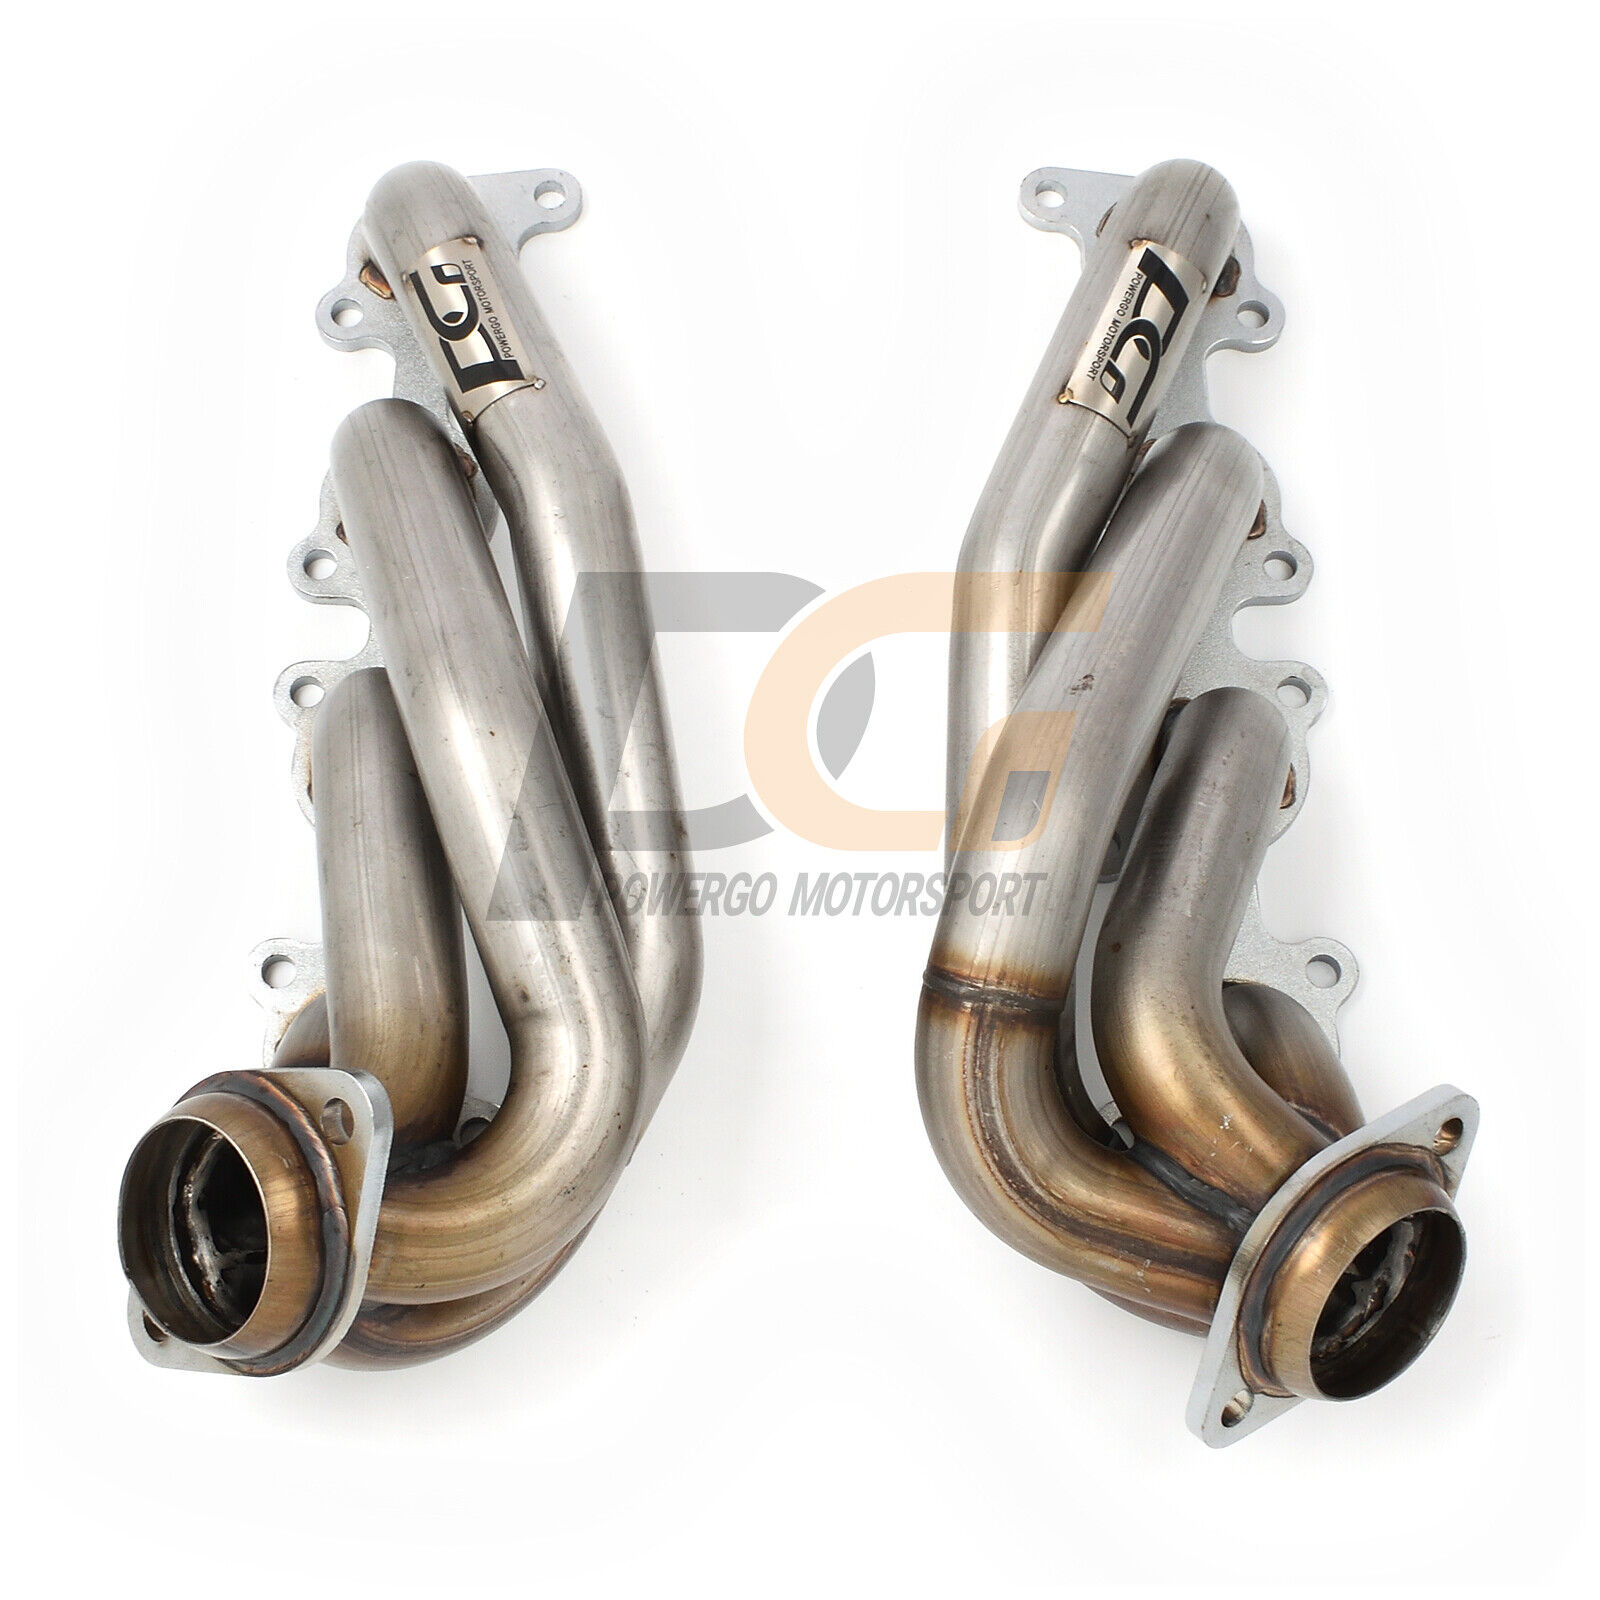 Shorty Headers for 2011-2017 Ford F150 XL XLT FX4 Lariat 5.0L DOHC Coyote V8